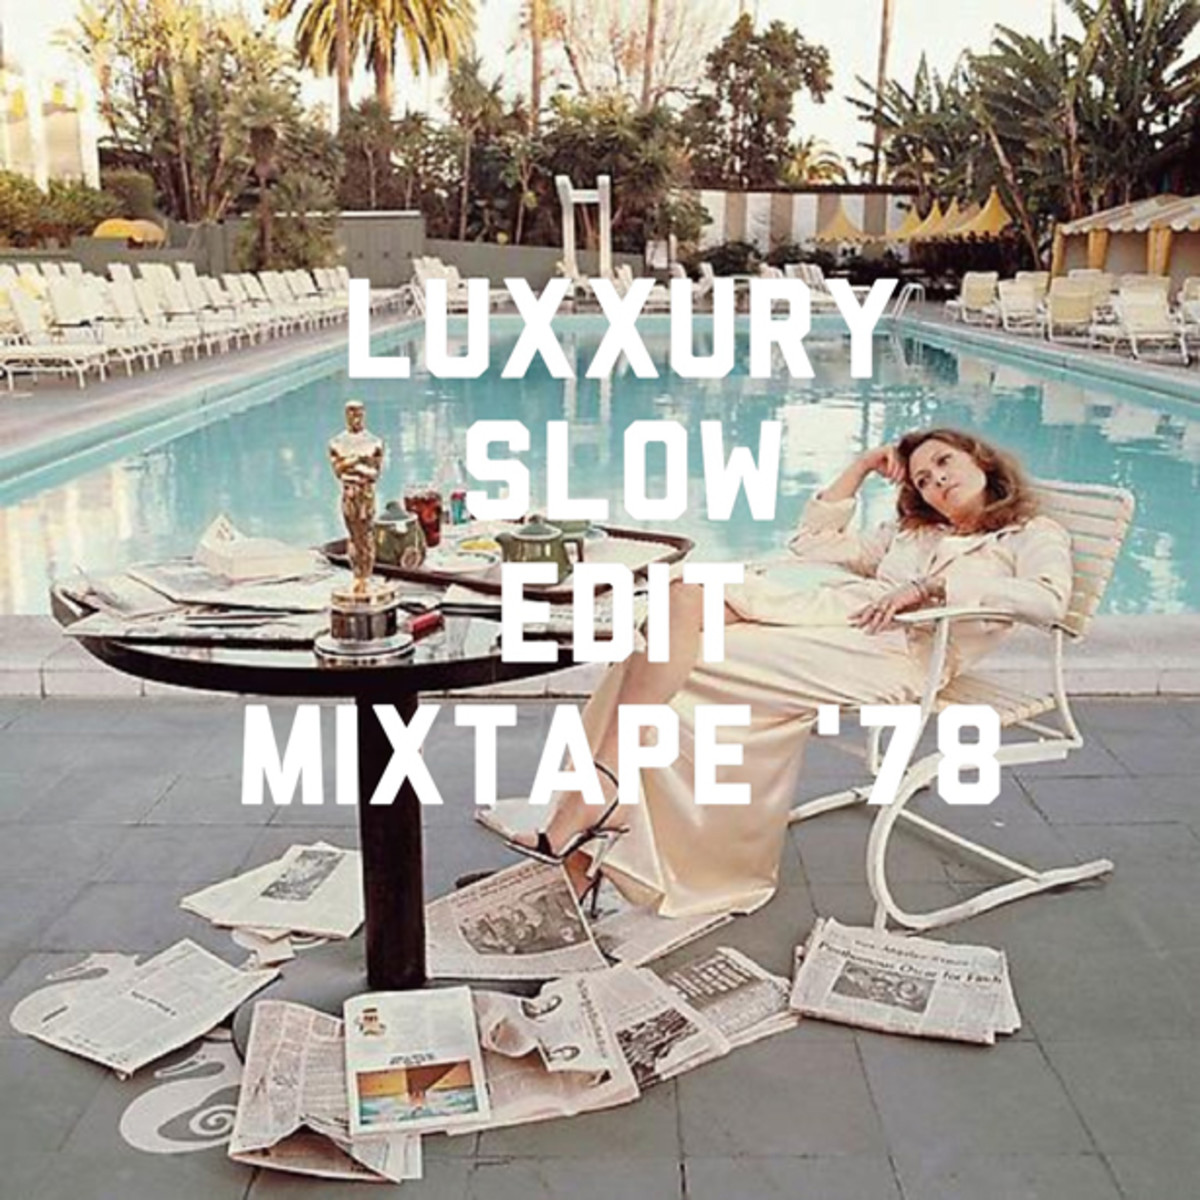 Luxxury Shares "Slow Edit Mixtape '78" As a Free EDM Download